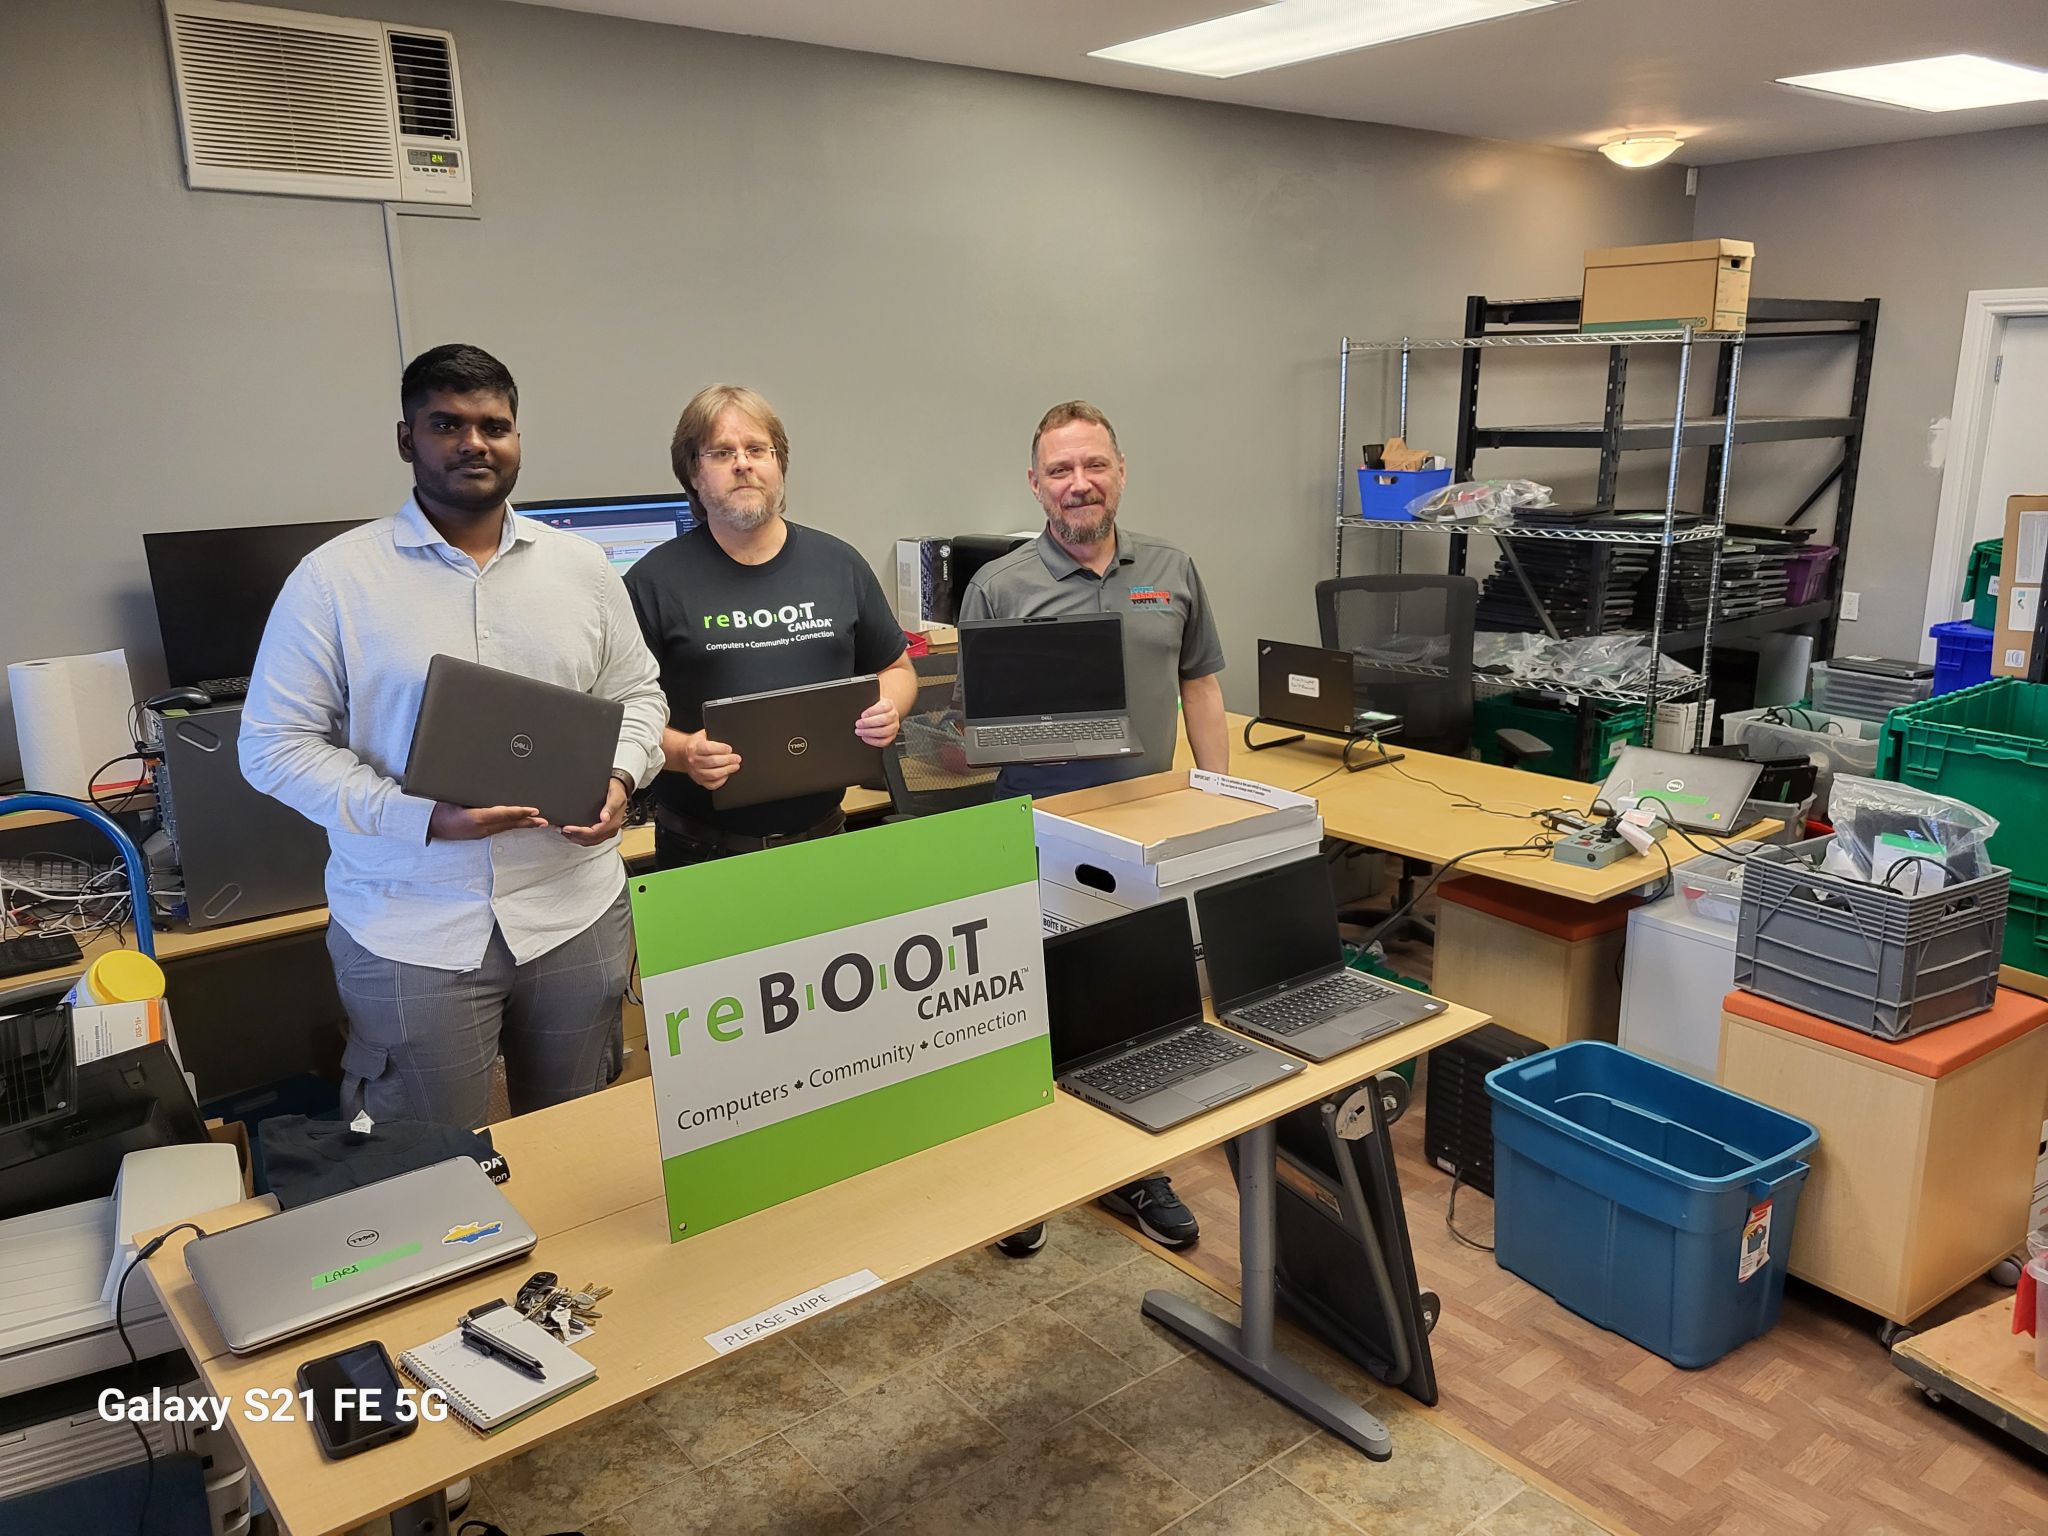 Representatives of reBOOT Canada and Avanade present laptops to a representative of Youth Assisting Youth.